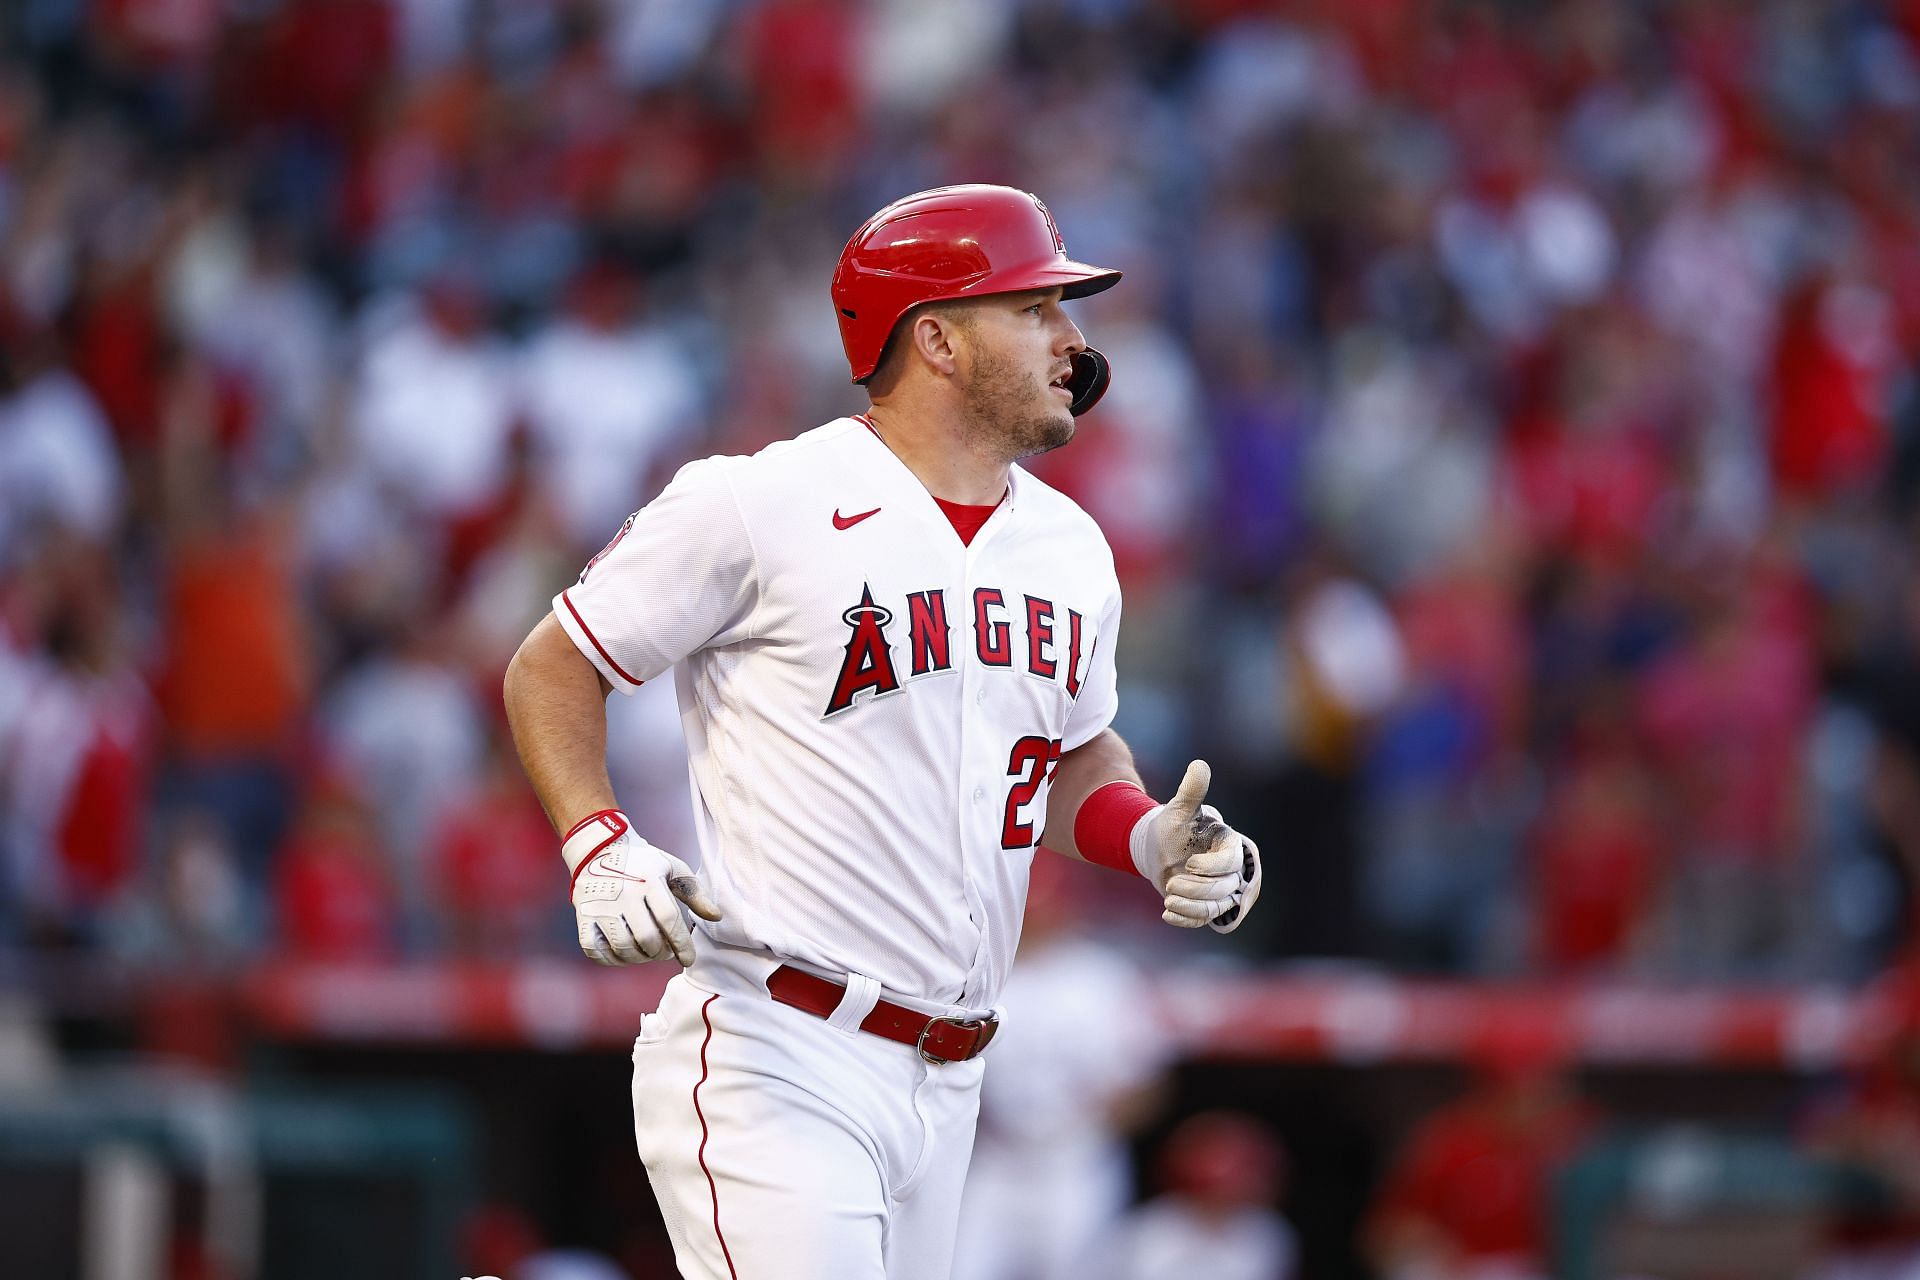 Angels outfielder Mike Trout has tried to close the book of drama that his fantasy football league quickly became.